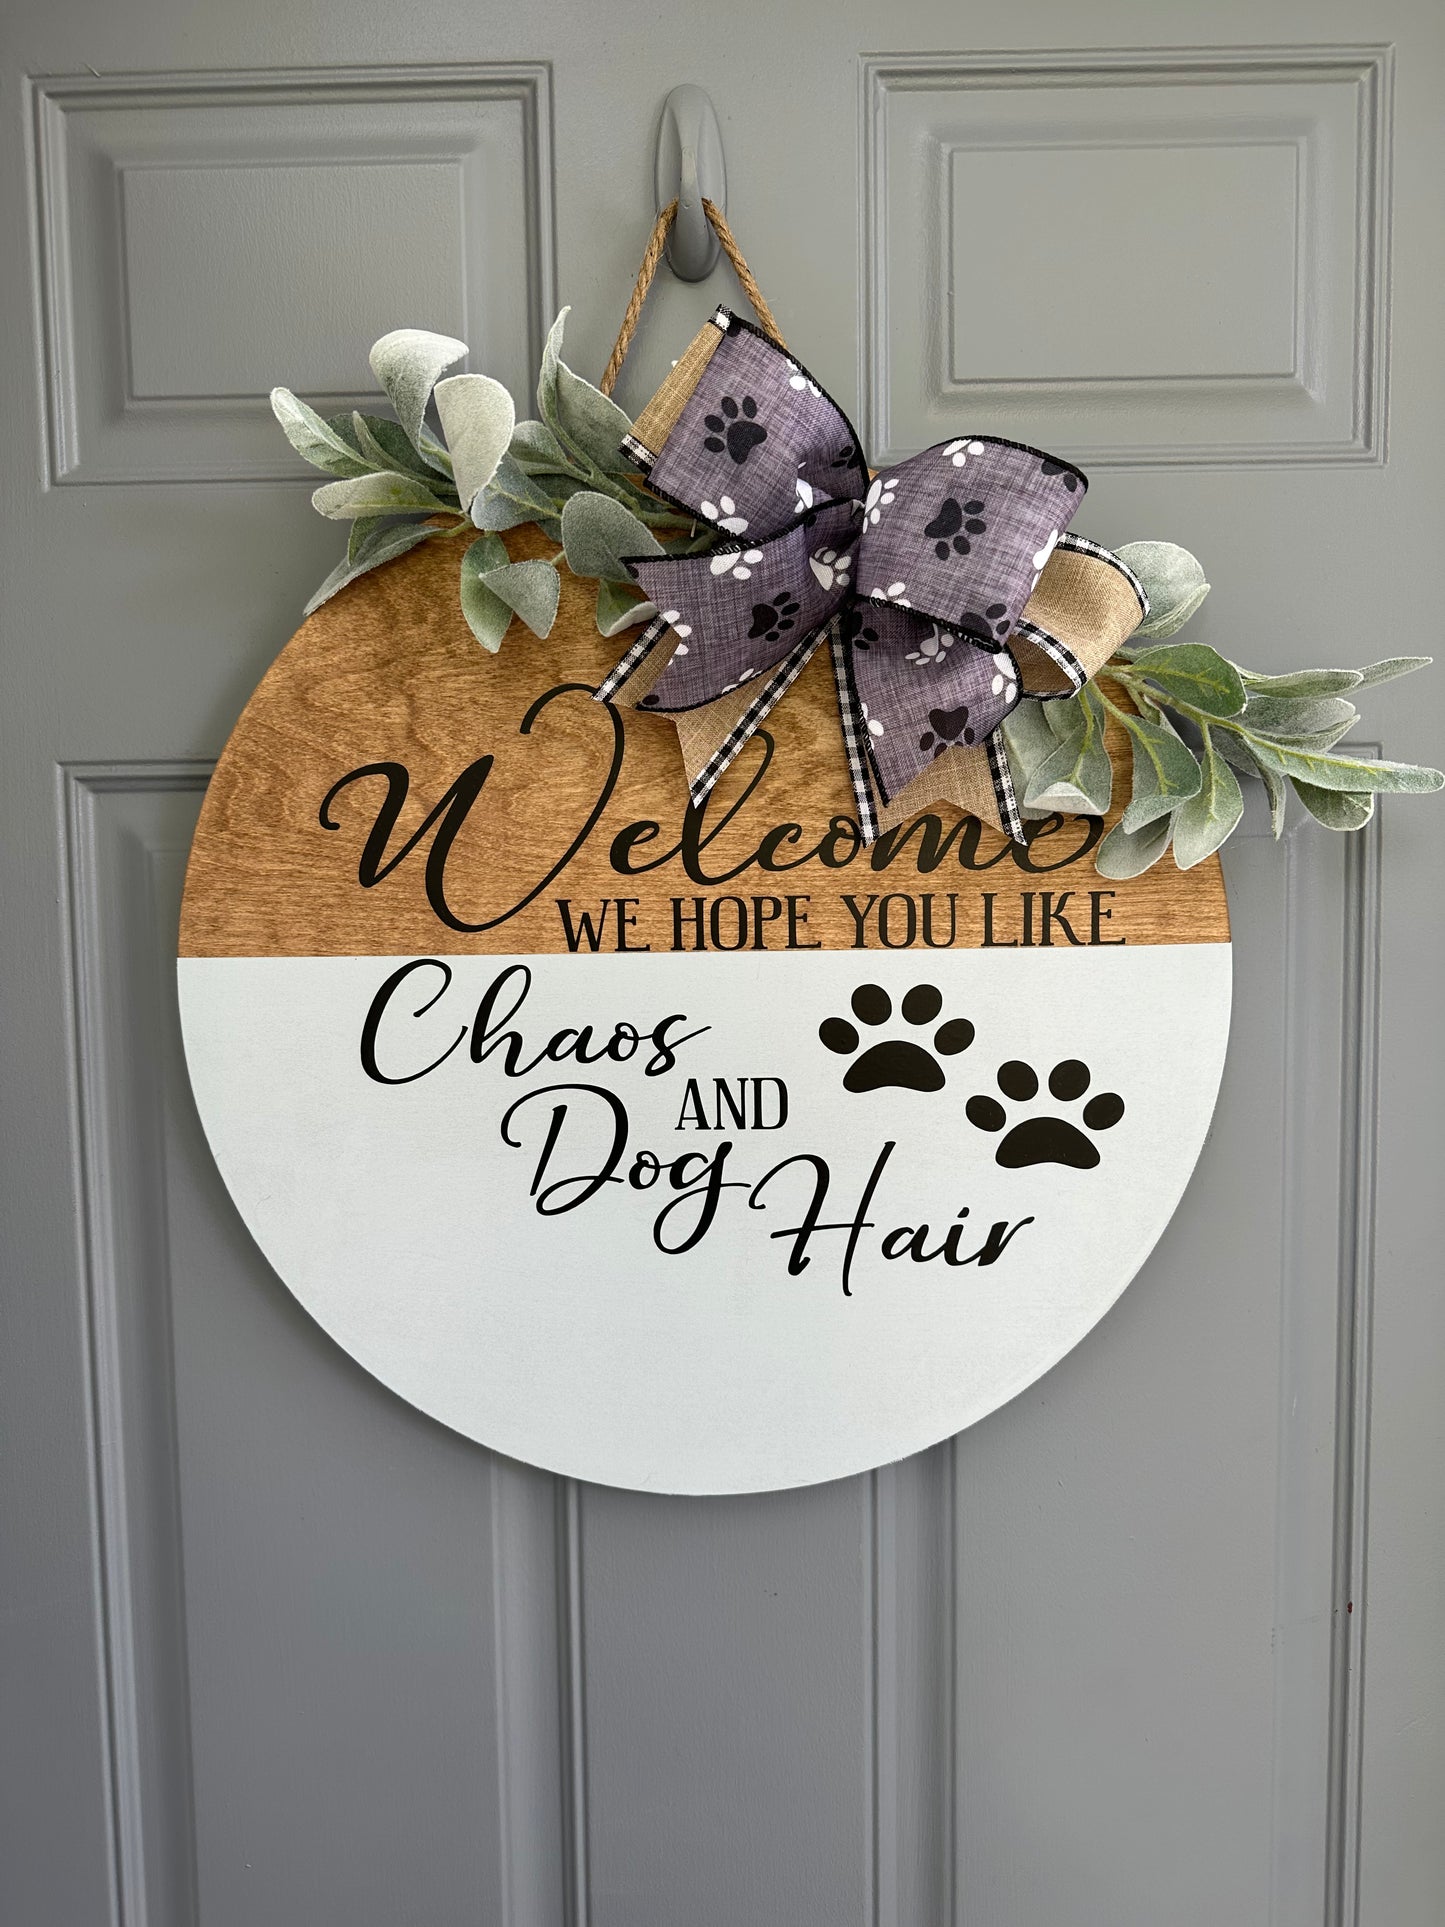 Welcome Hope You Like Chaos & Dog Hair Door Hanger - Willow Love Bug Designs 